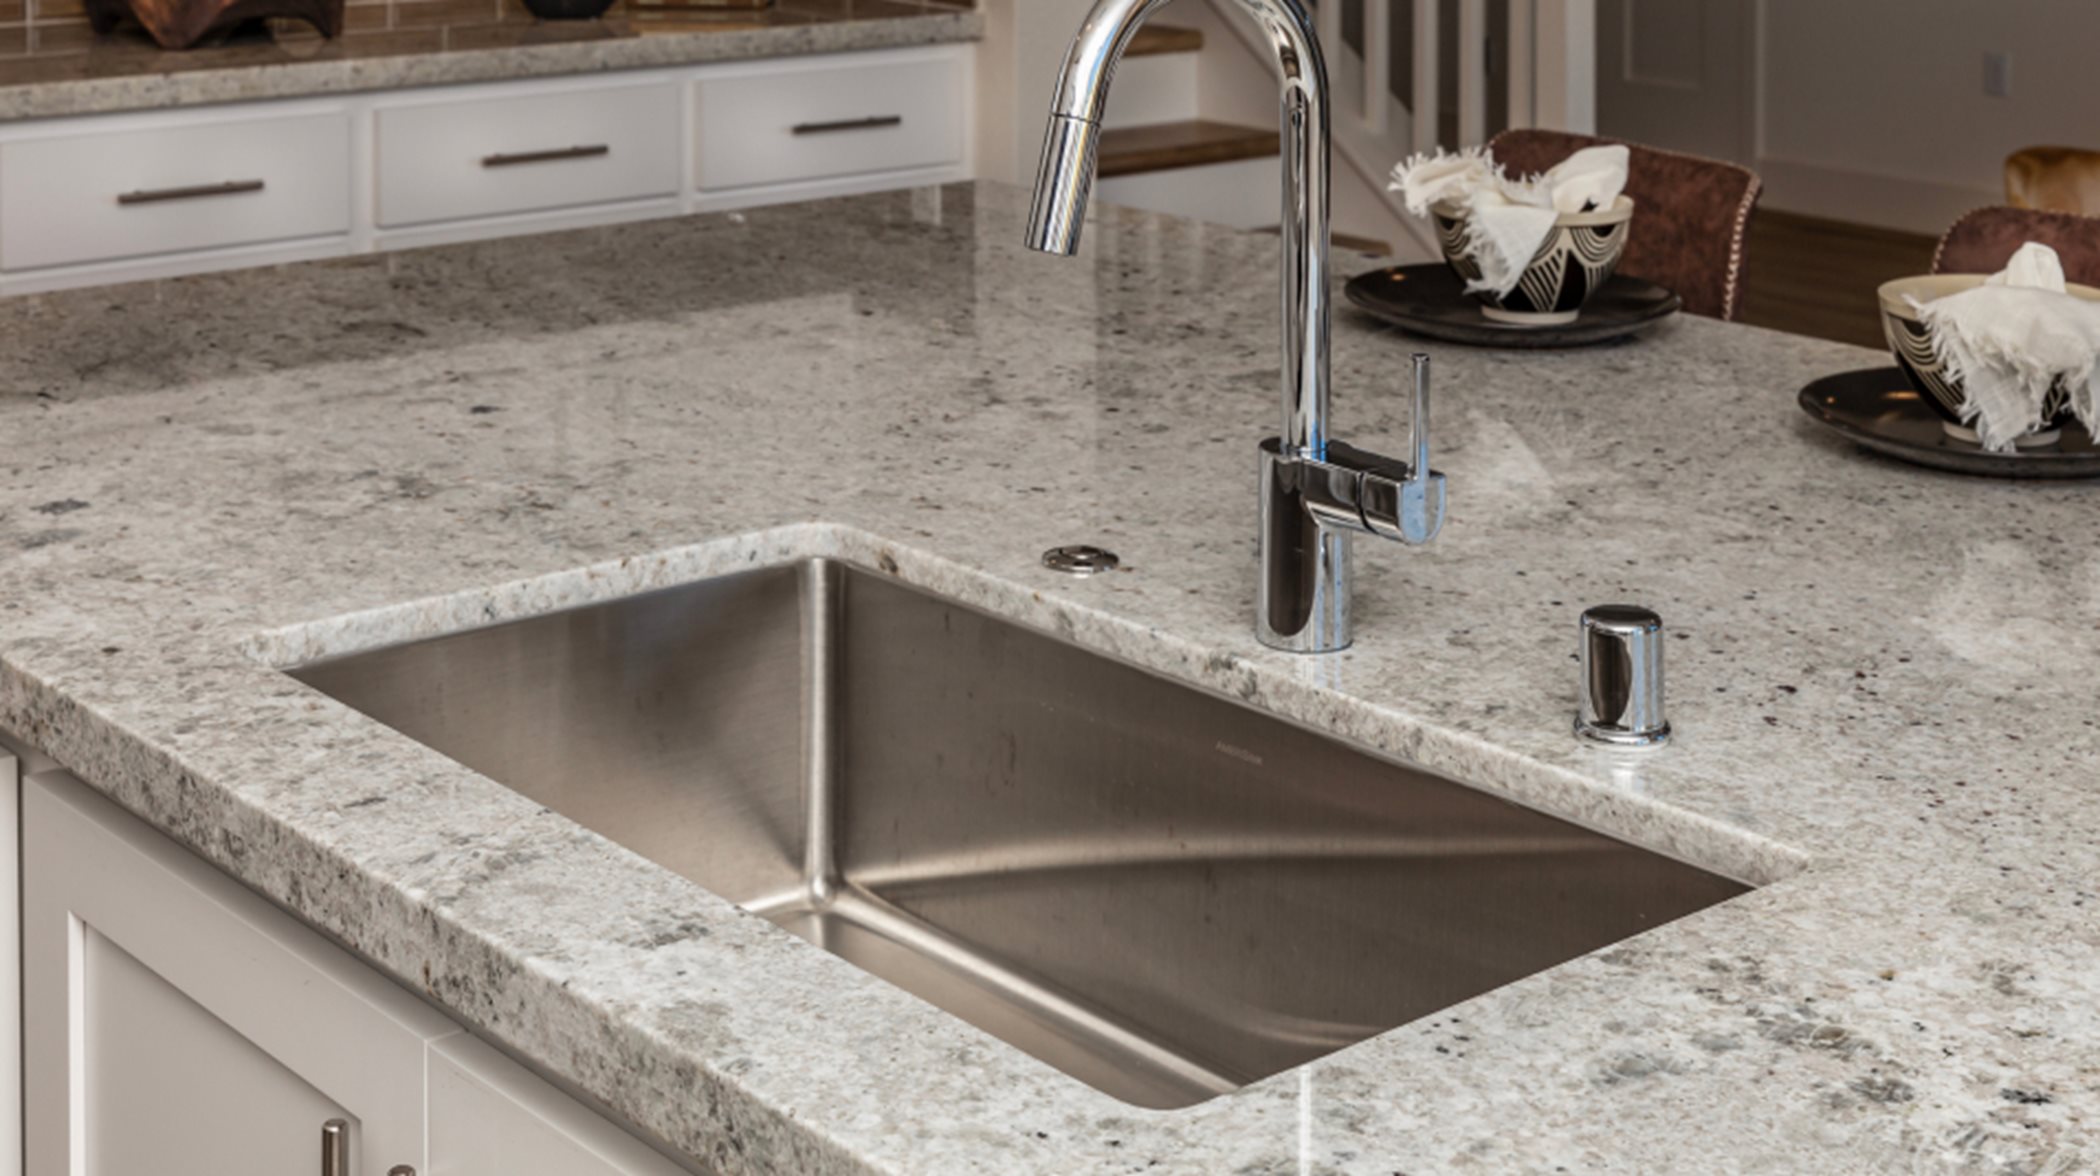 Granite counterop with sink